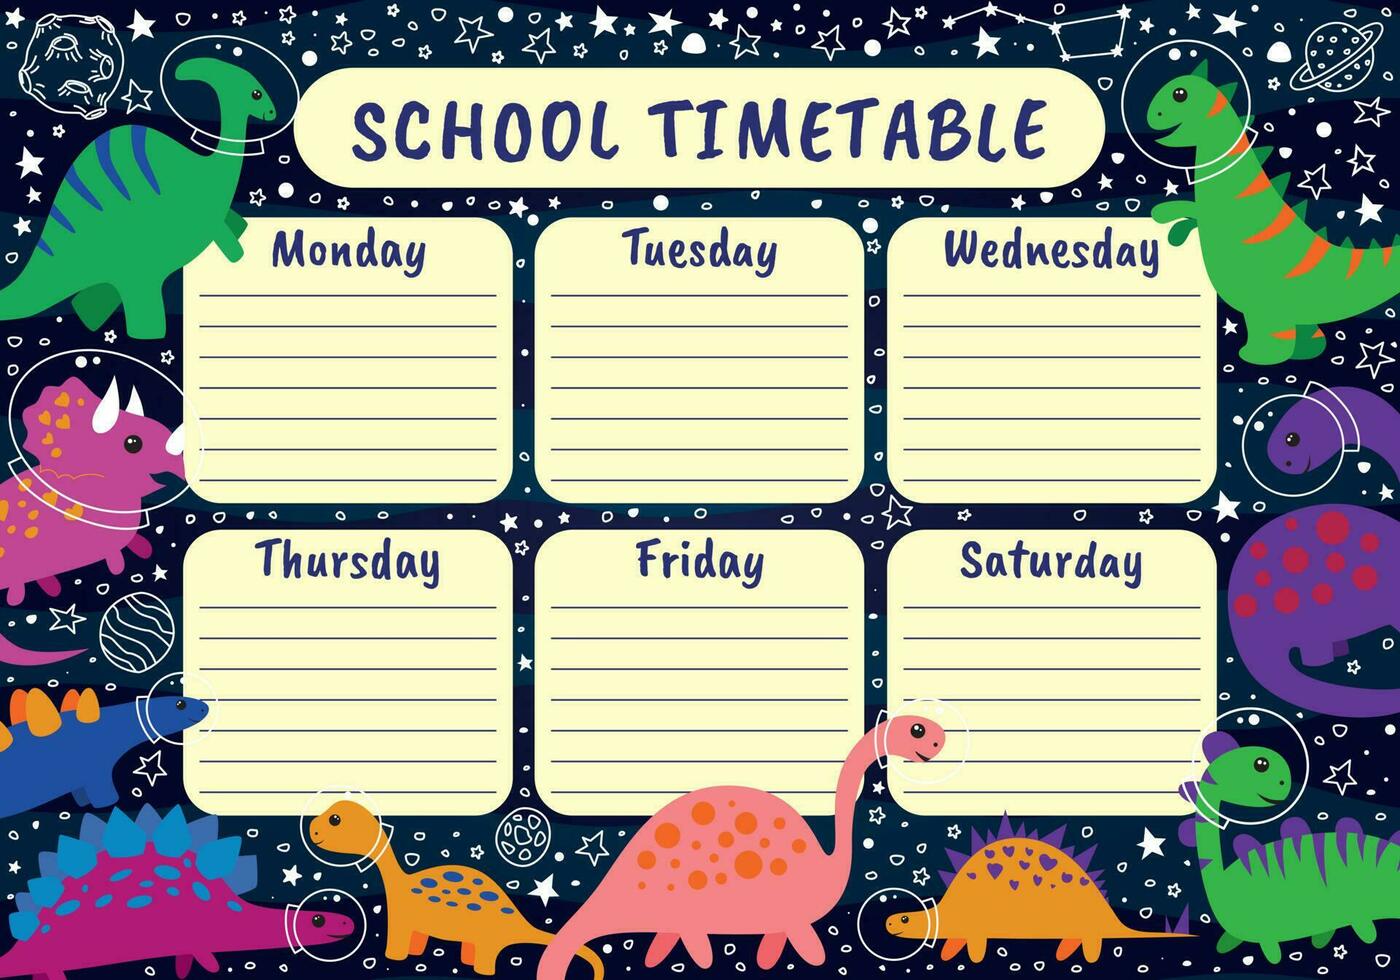 School timetable with dinosaurs vector